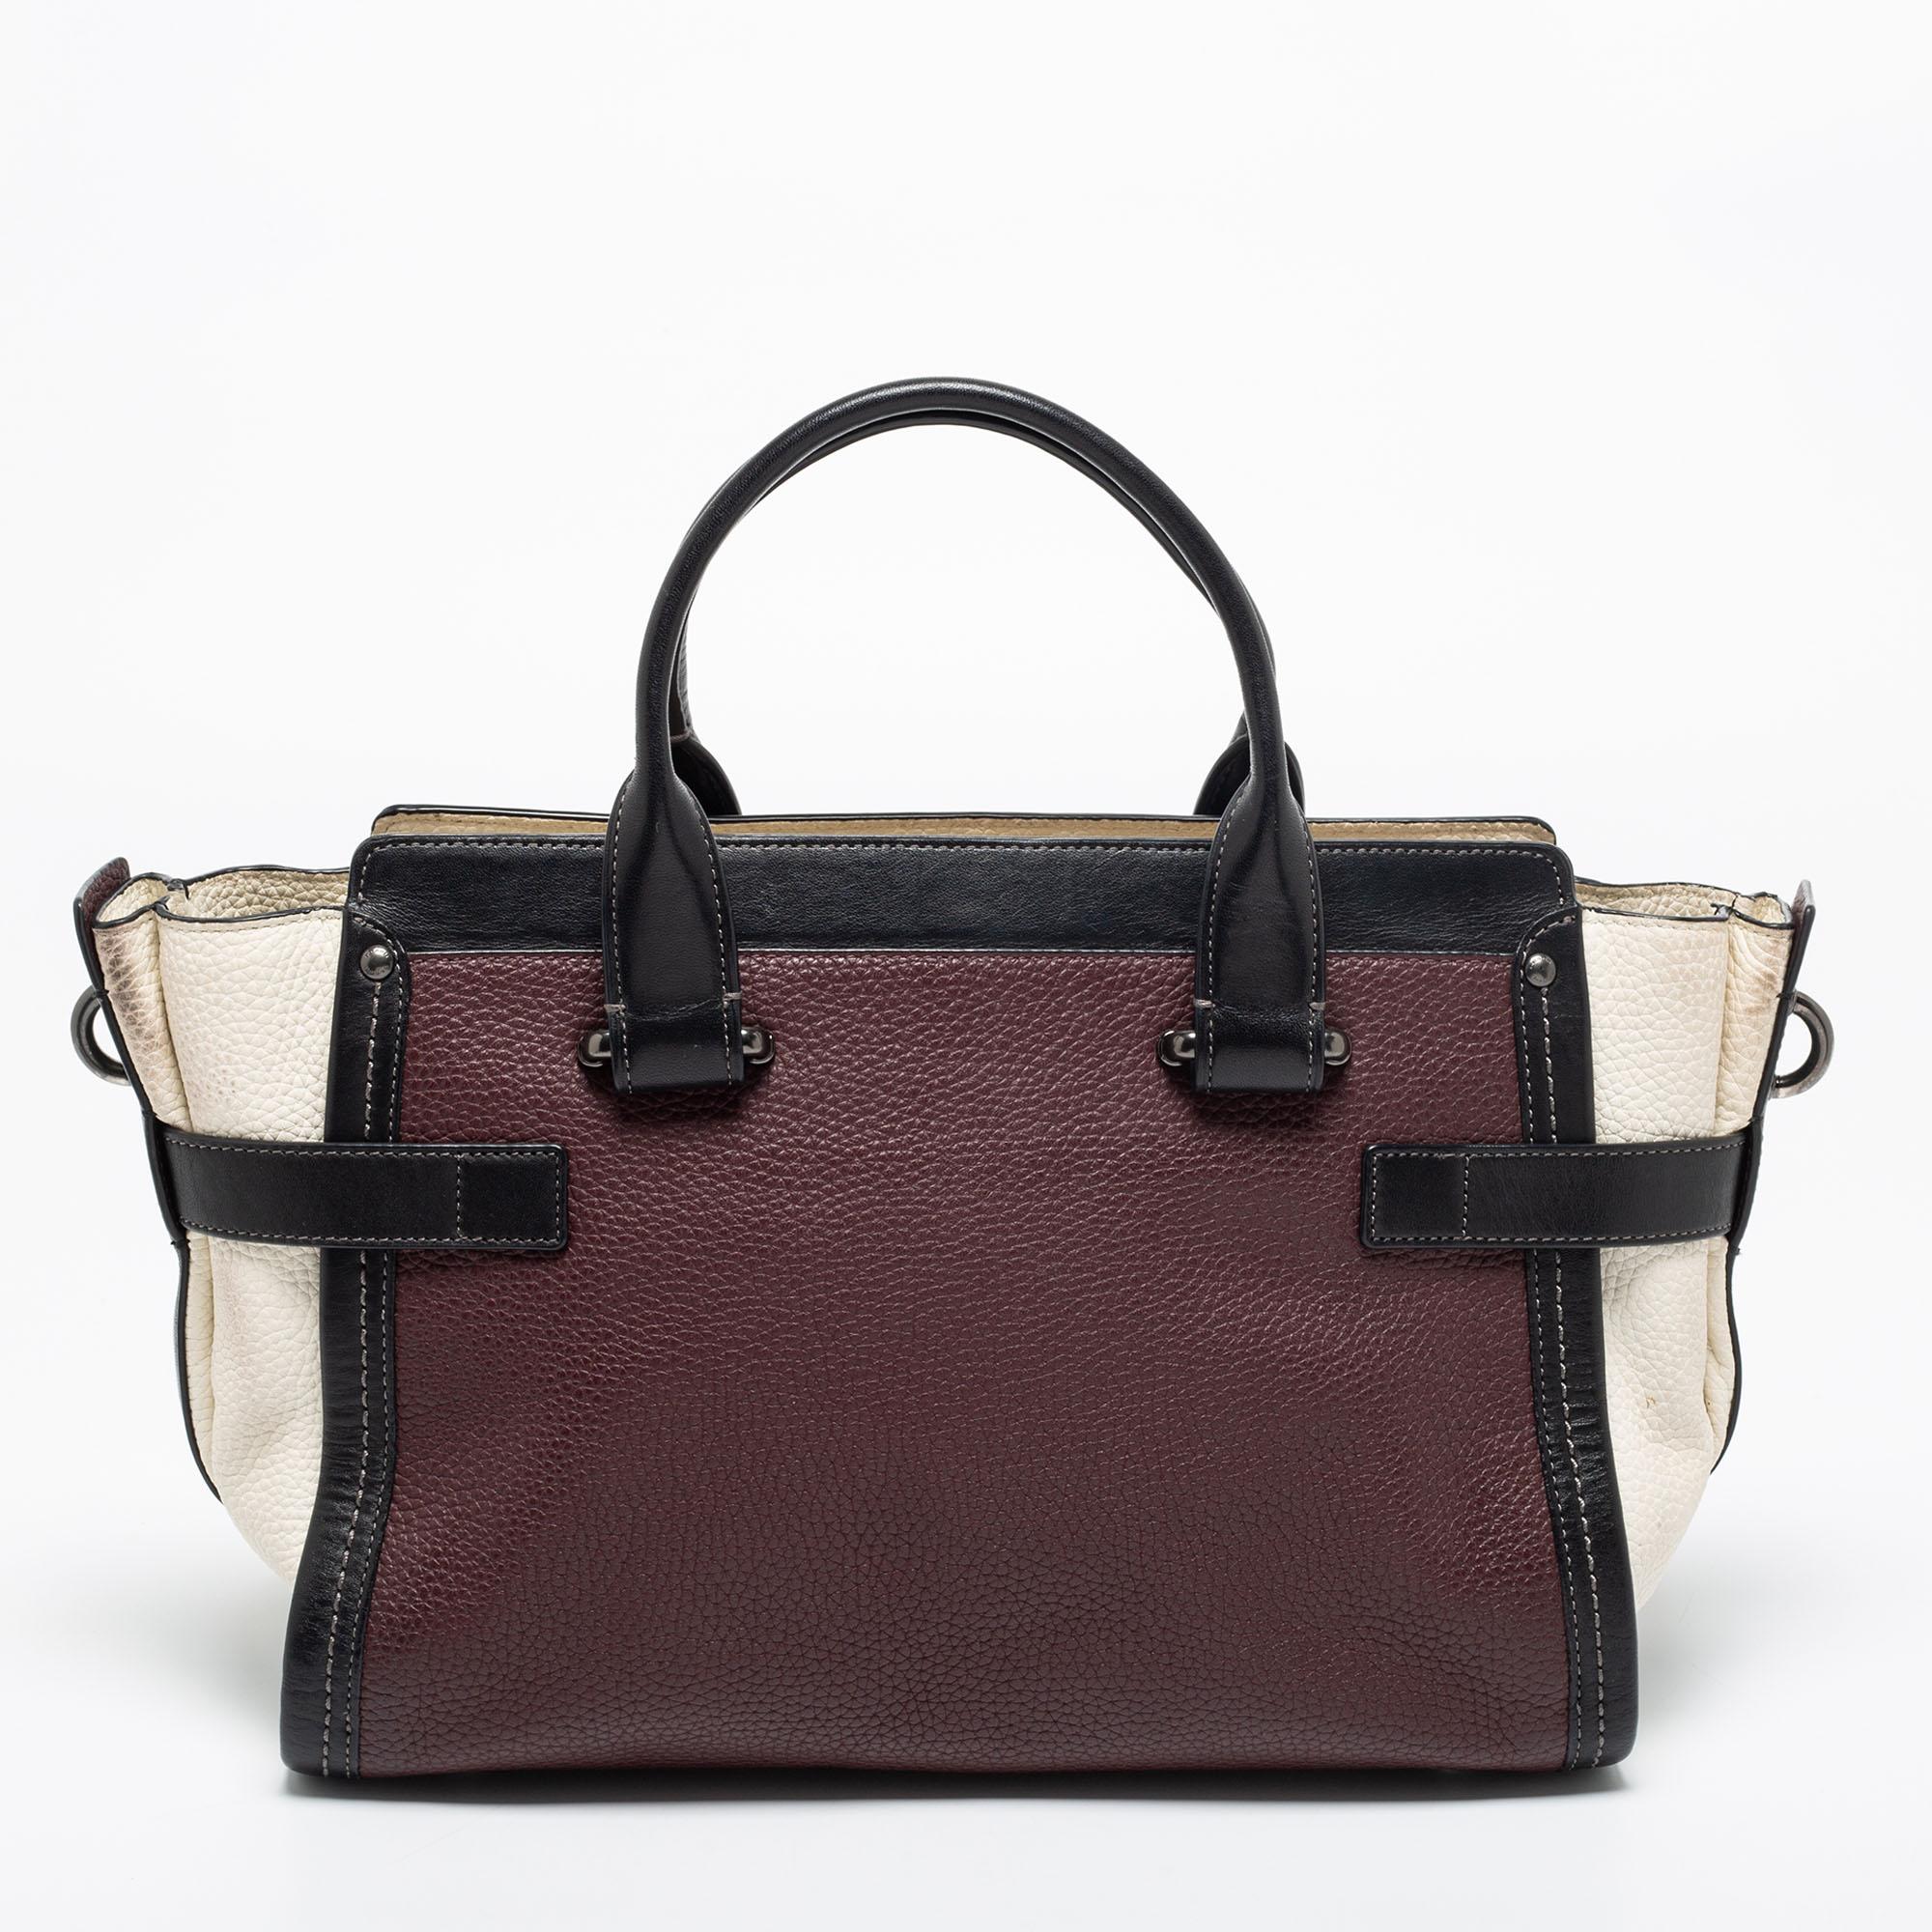 Meticulously crafted from leather, this Coach Swagger tote is functional yet stylish. It carries a multicolored exterior and a top zipper that opens into a spacious interior designed to carry your essentials. The bag is equipped with two handles and